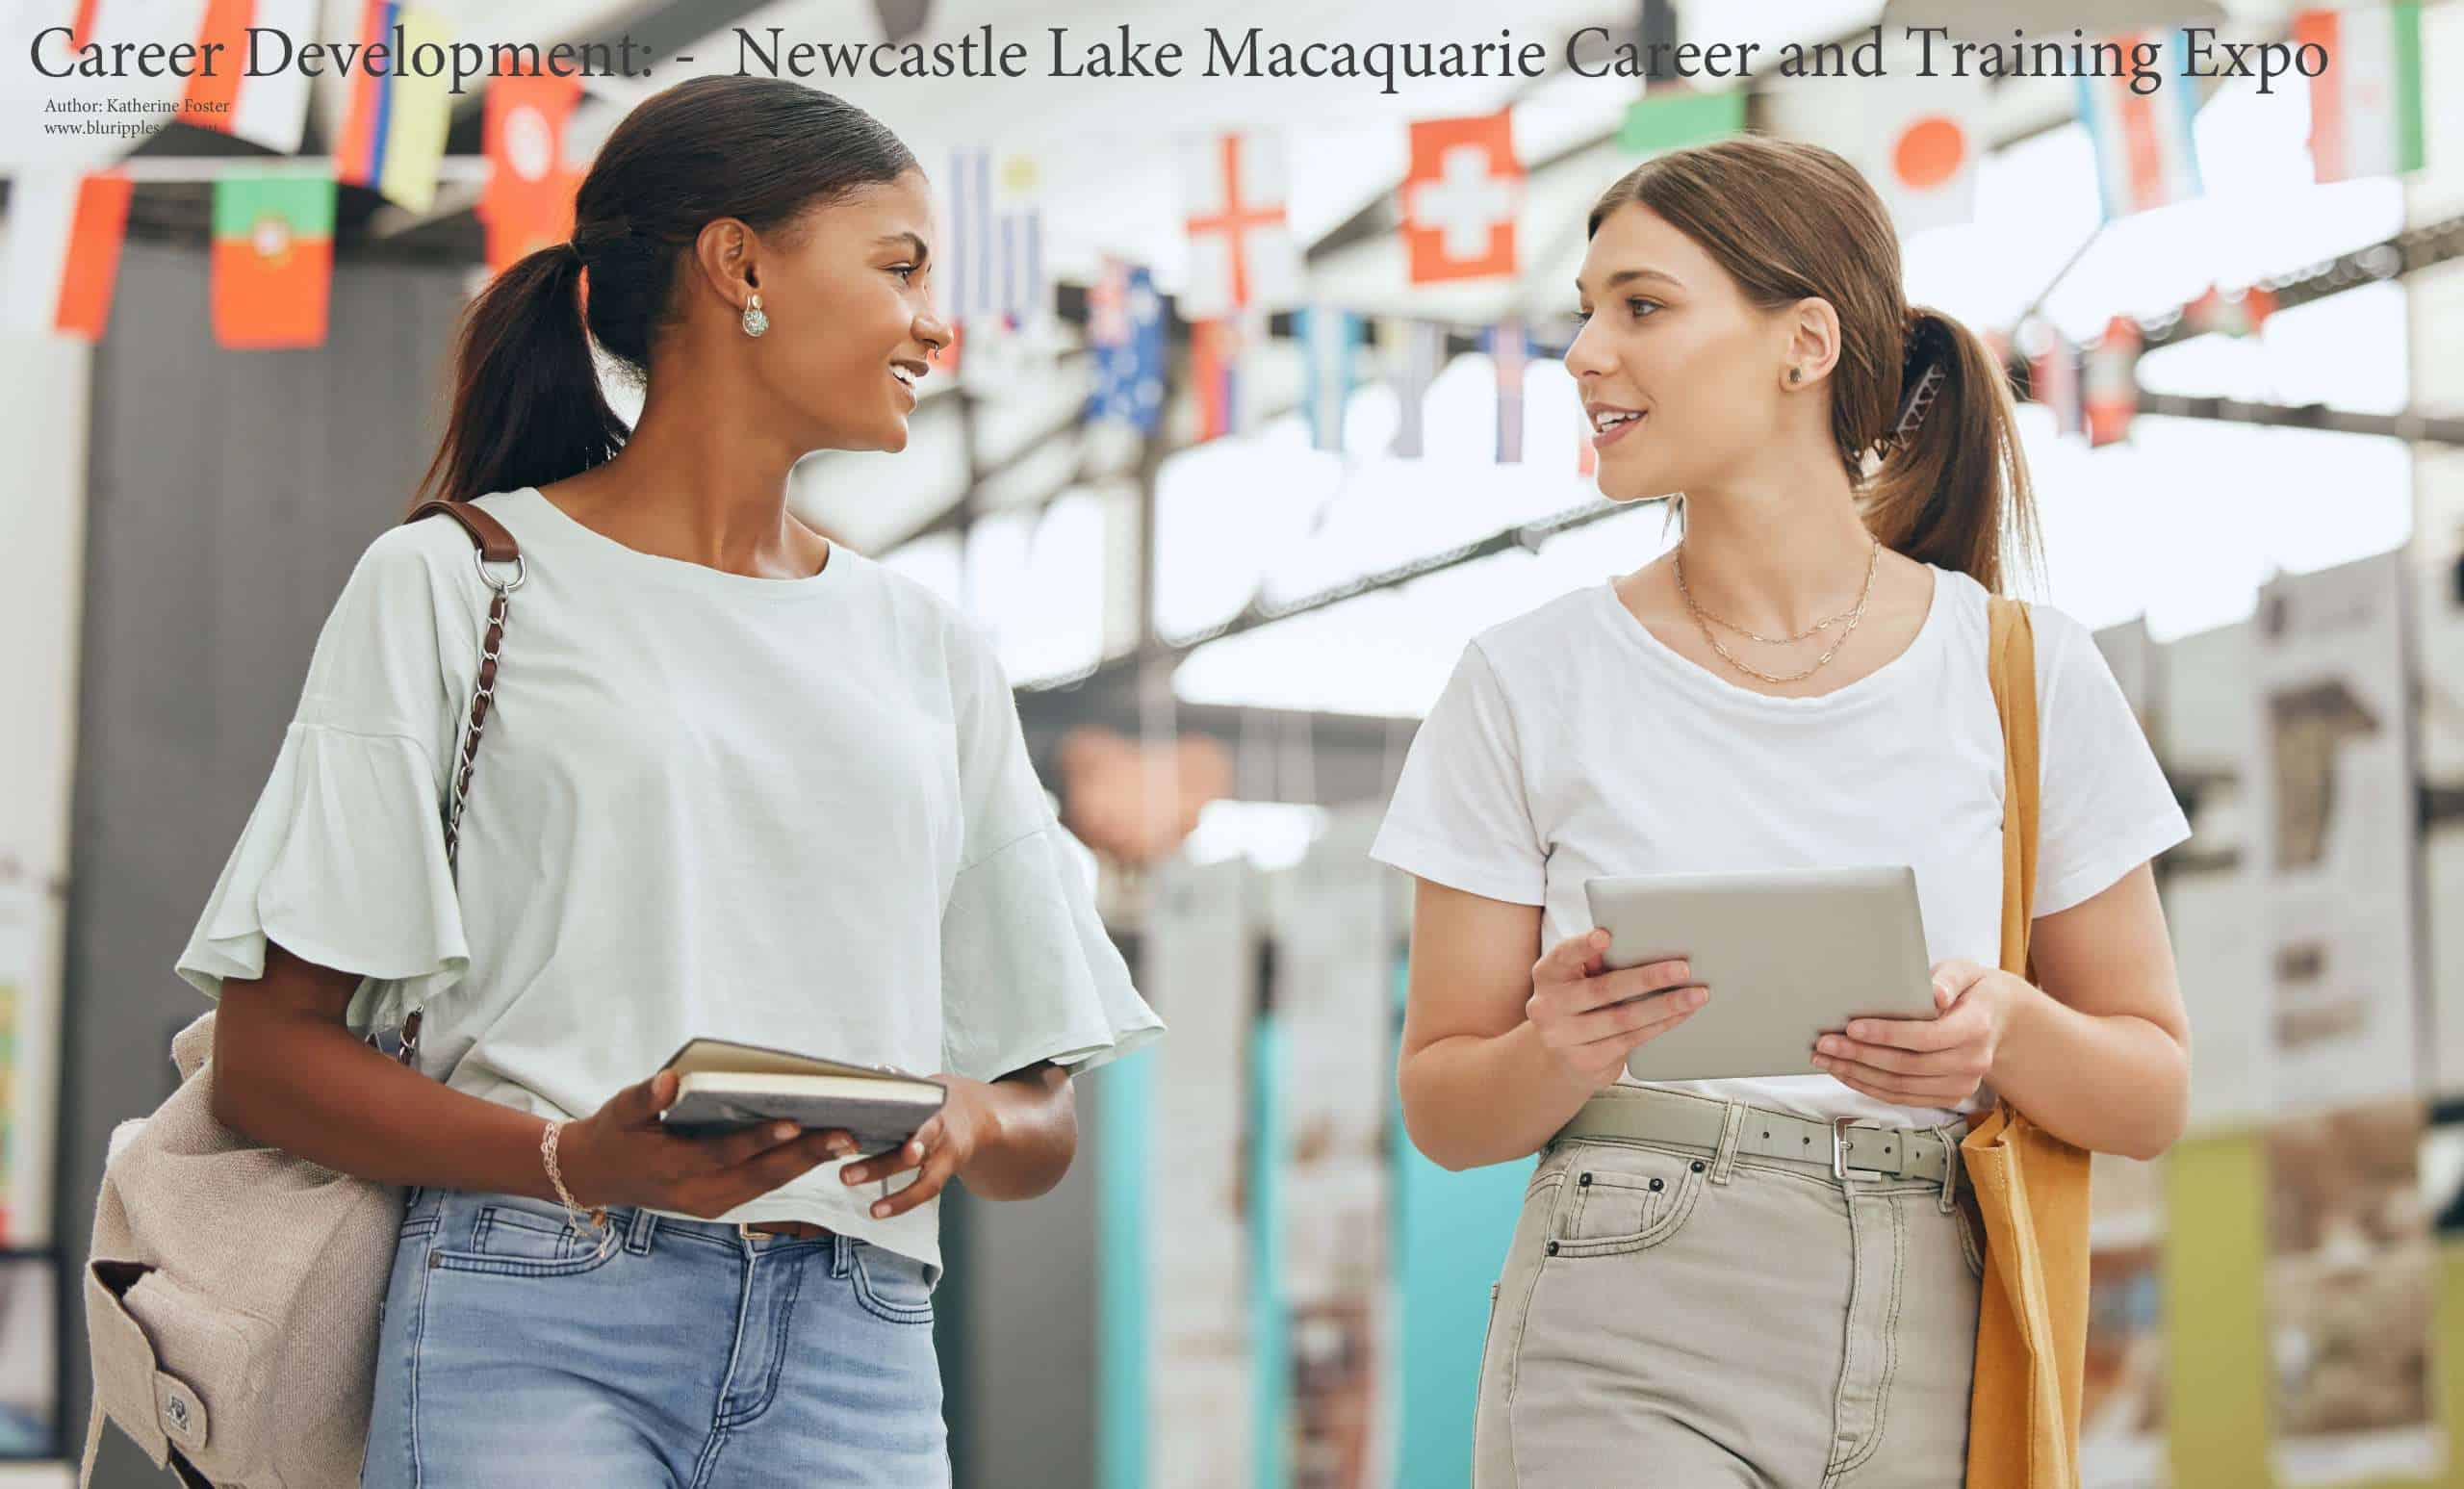 Newcastle Lake Macquarie Career and Training Expo 2015 by Katherine Foster